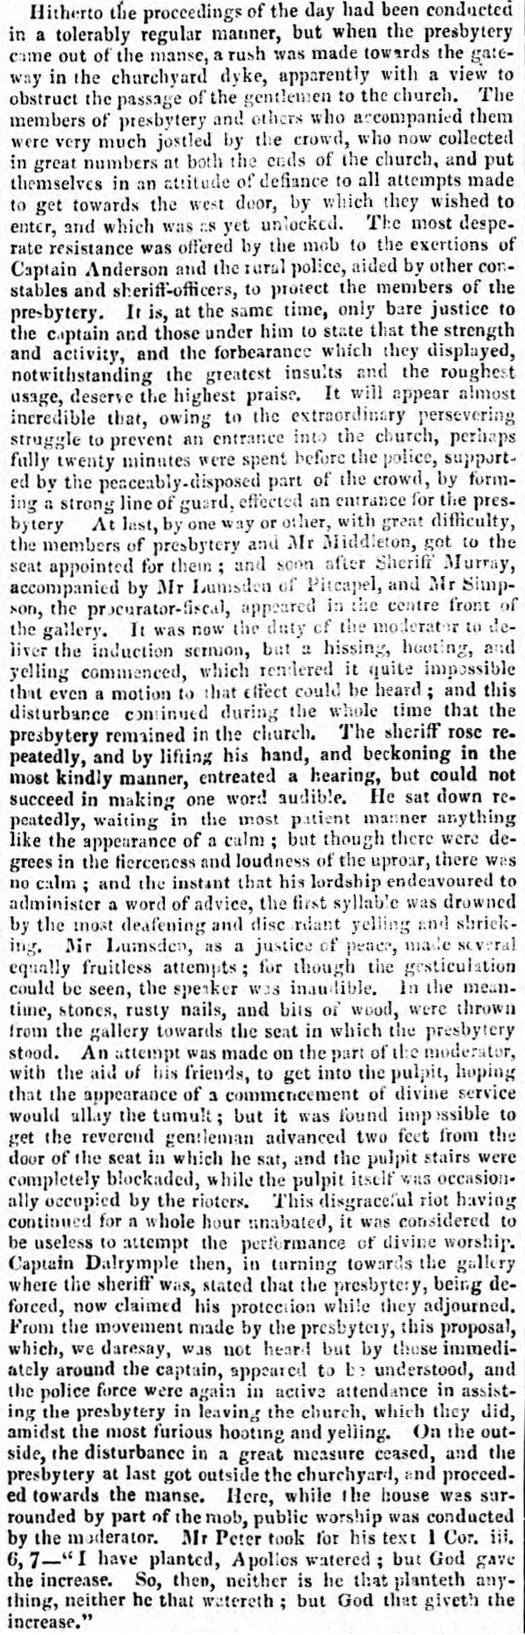 Screenshot_2019-11-16 Settlement At Cui sai mono Inverness Courier Wednesday 17 November 1841 British Newspaper Archive